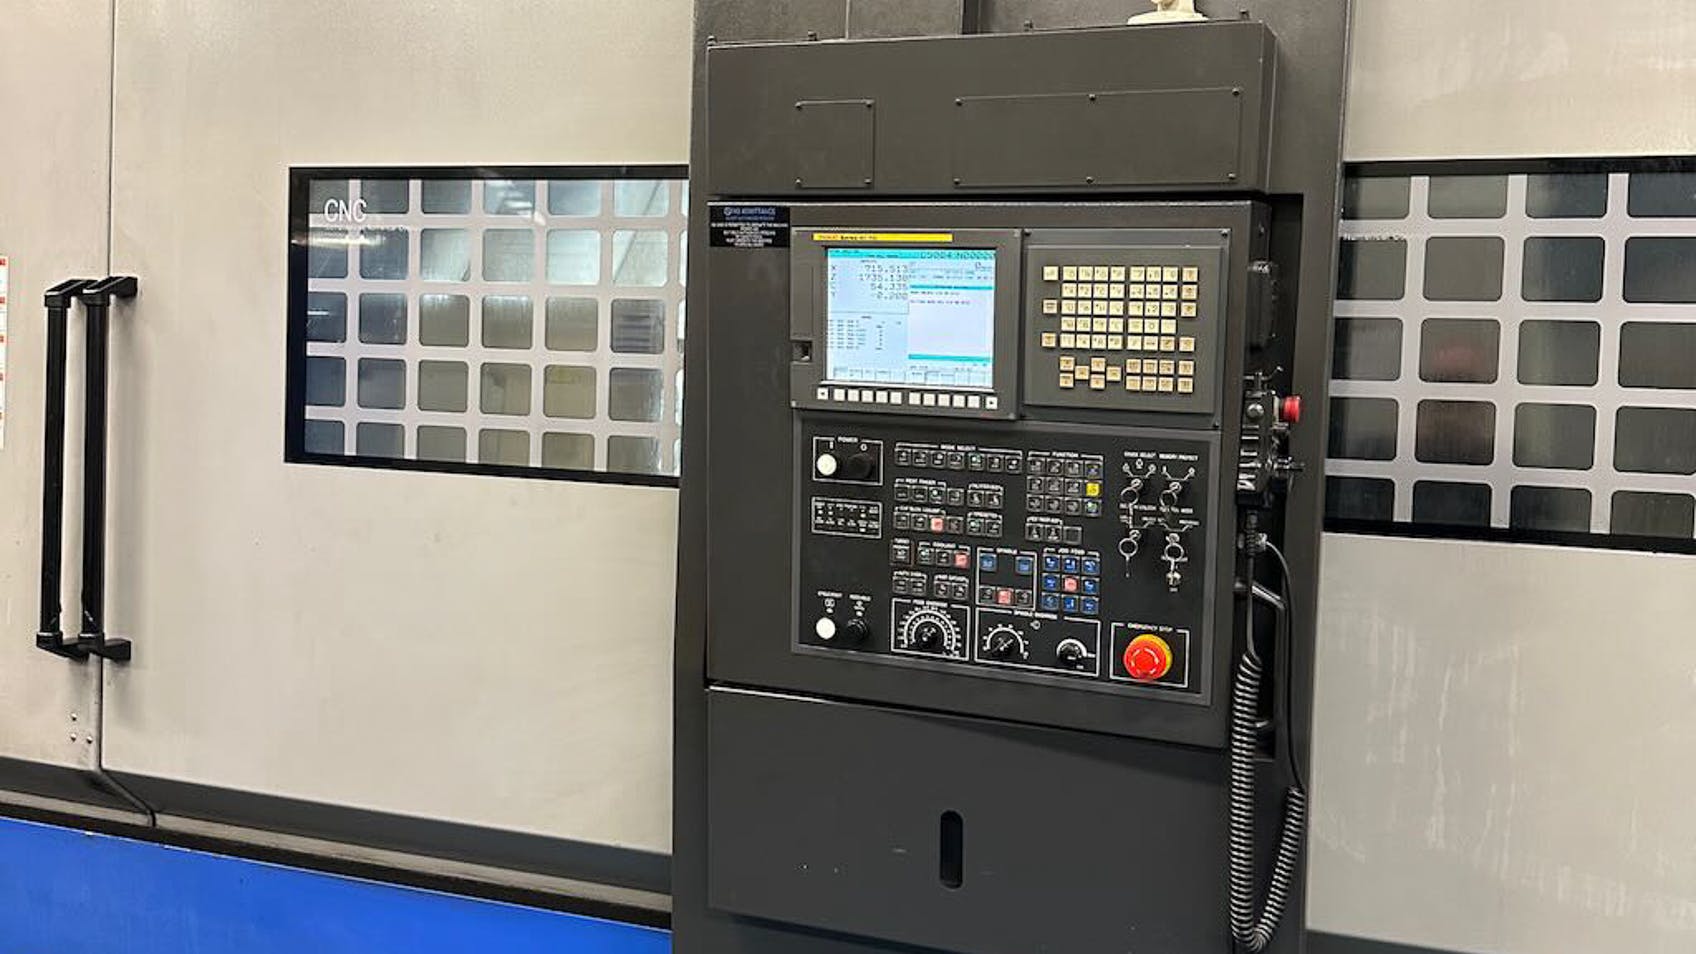 2014 Hwacheon Hi-Tech 850L YMC Extra-Large CNC Turning Centre with Milling, Y & C Axis